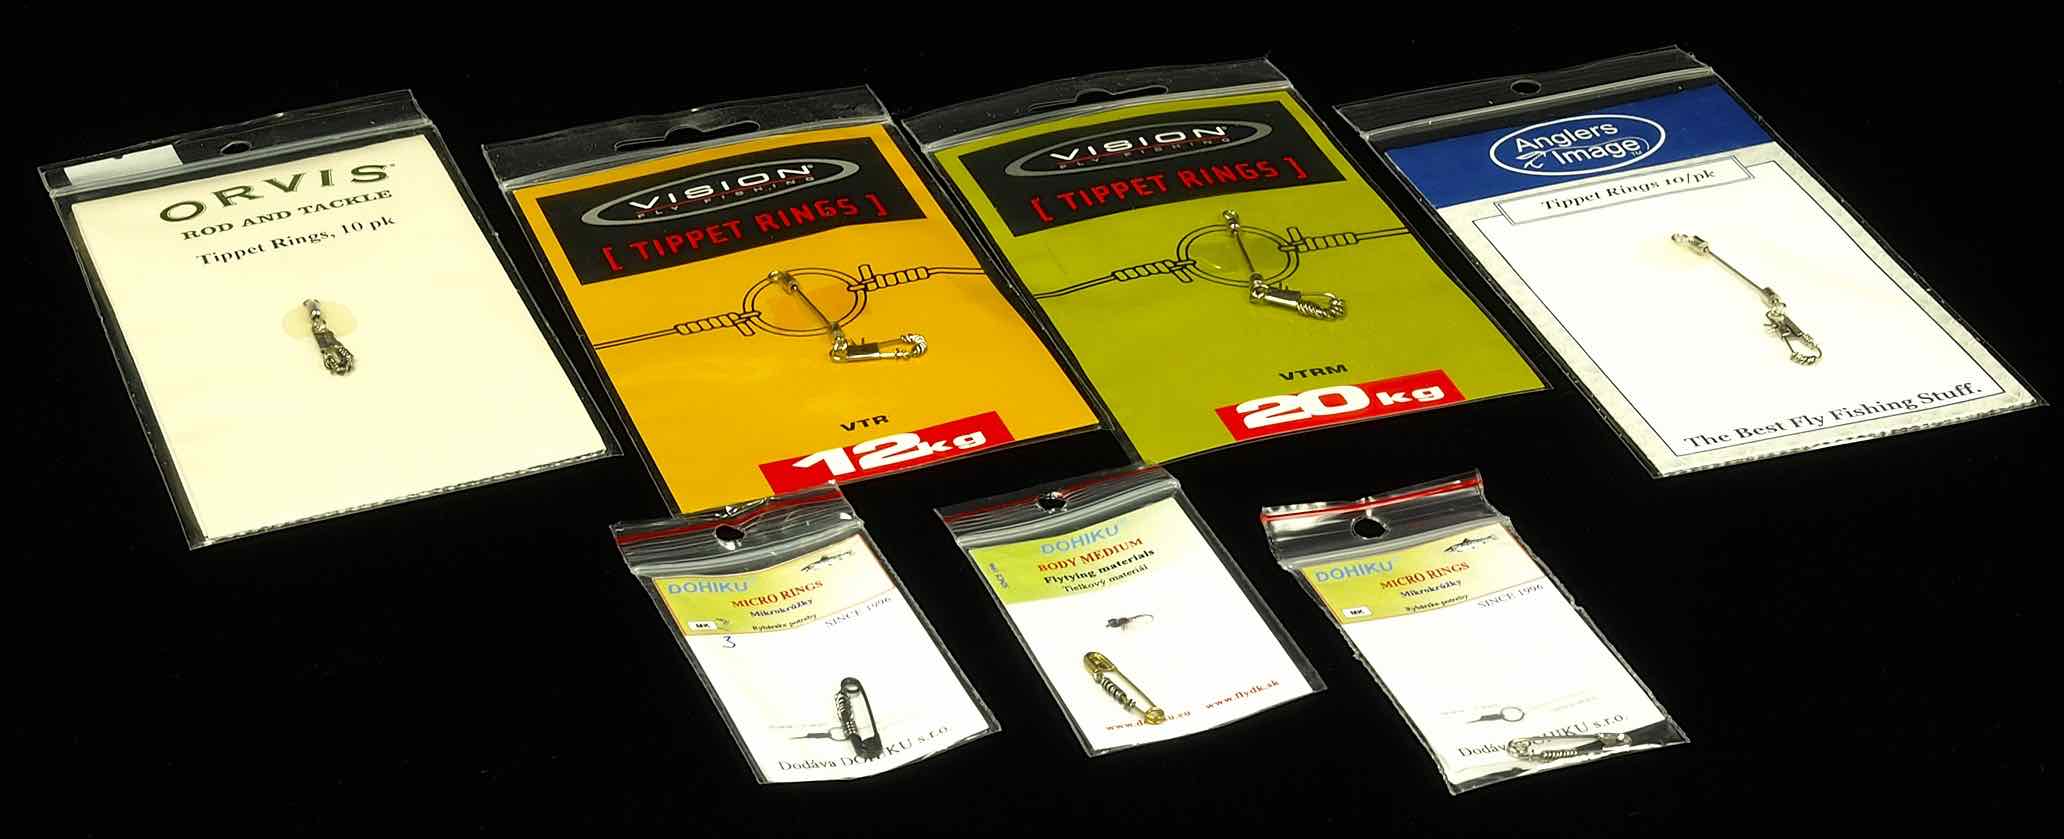 Maxima Monofilament and Fluorocarbon Tapered Leaders and Tippets